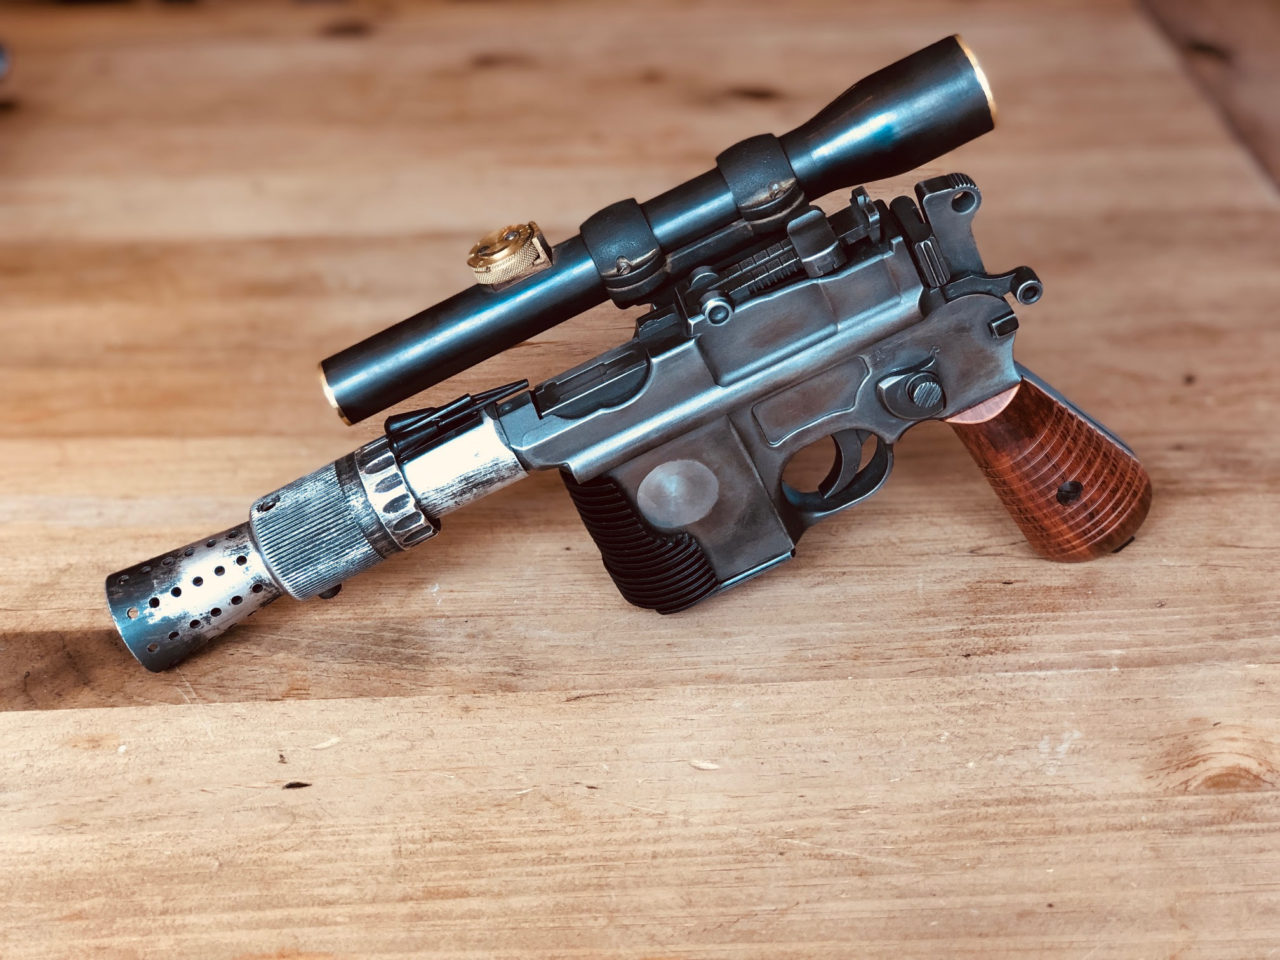 One-Of-A-Kind Legendary Movie Replica To Be Auctioned Off To Benefit Student Air Rifle Program